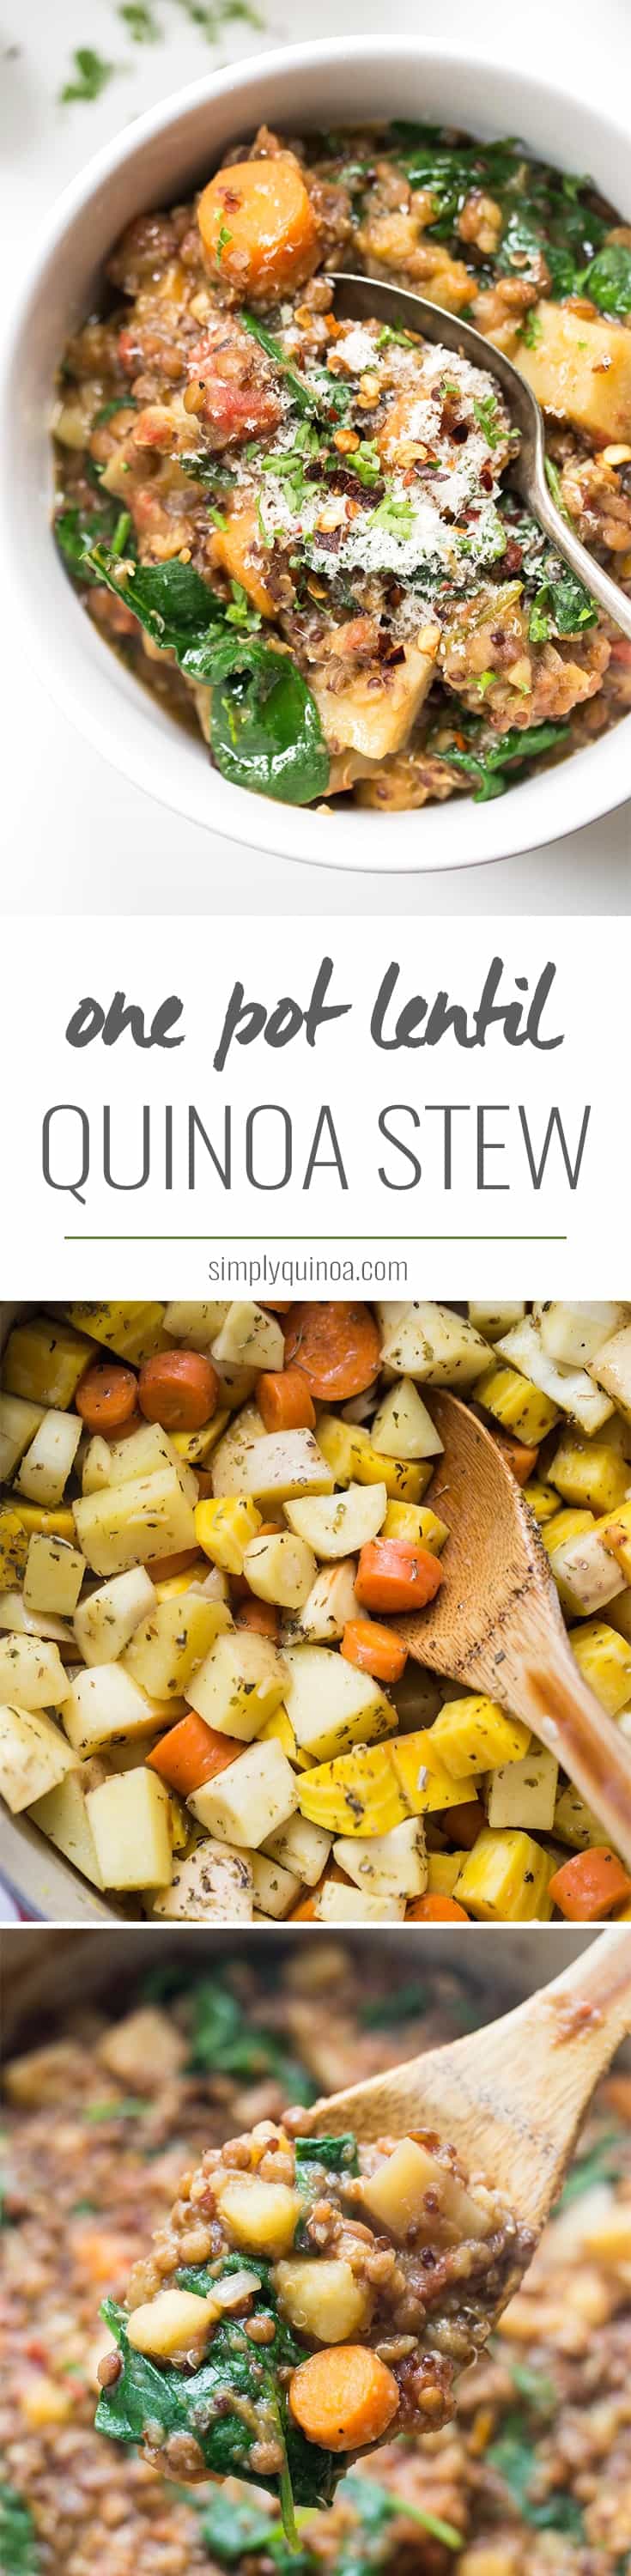 This root veggie & lentil quinoa stew uses only ONE POT and is made with only healthy, wholesome ingredients! [vegan]